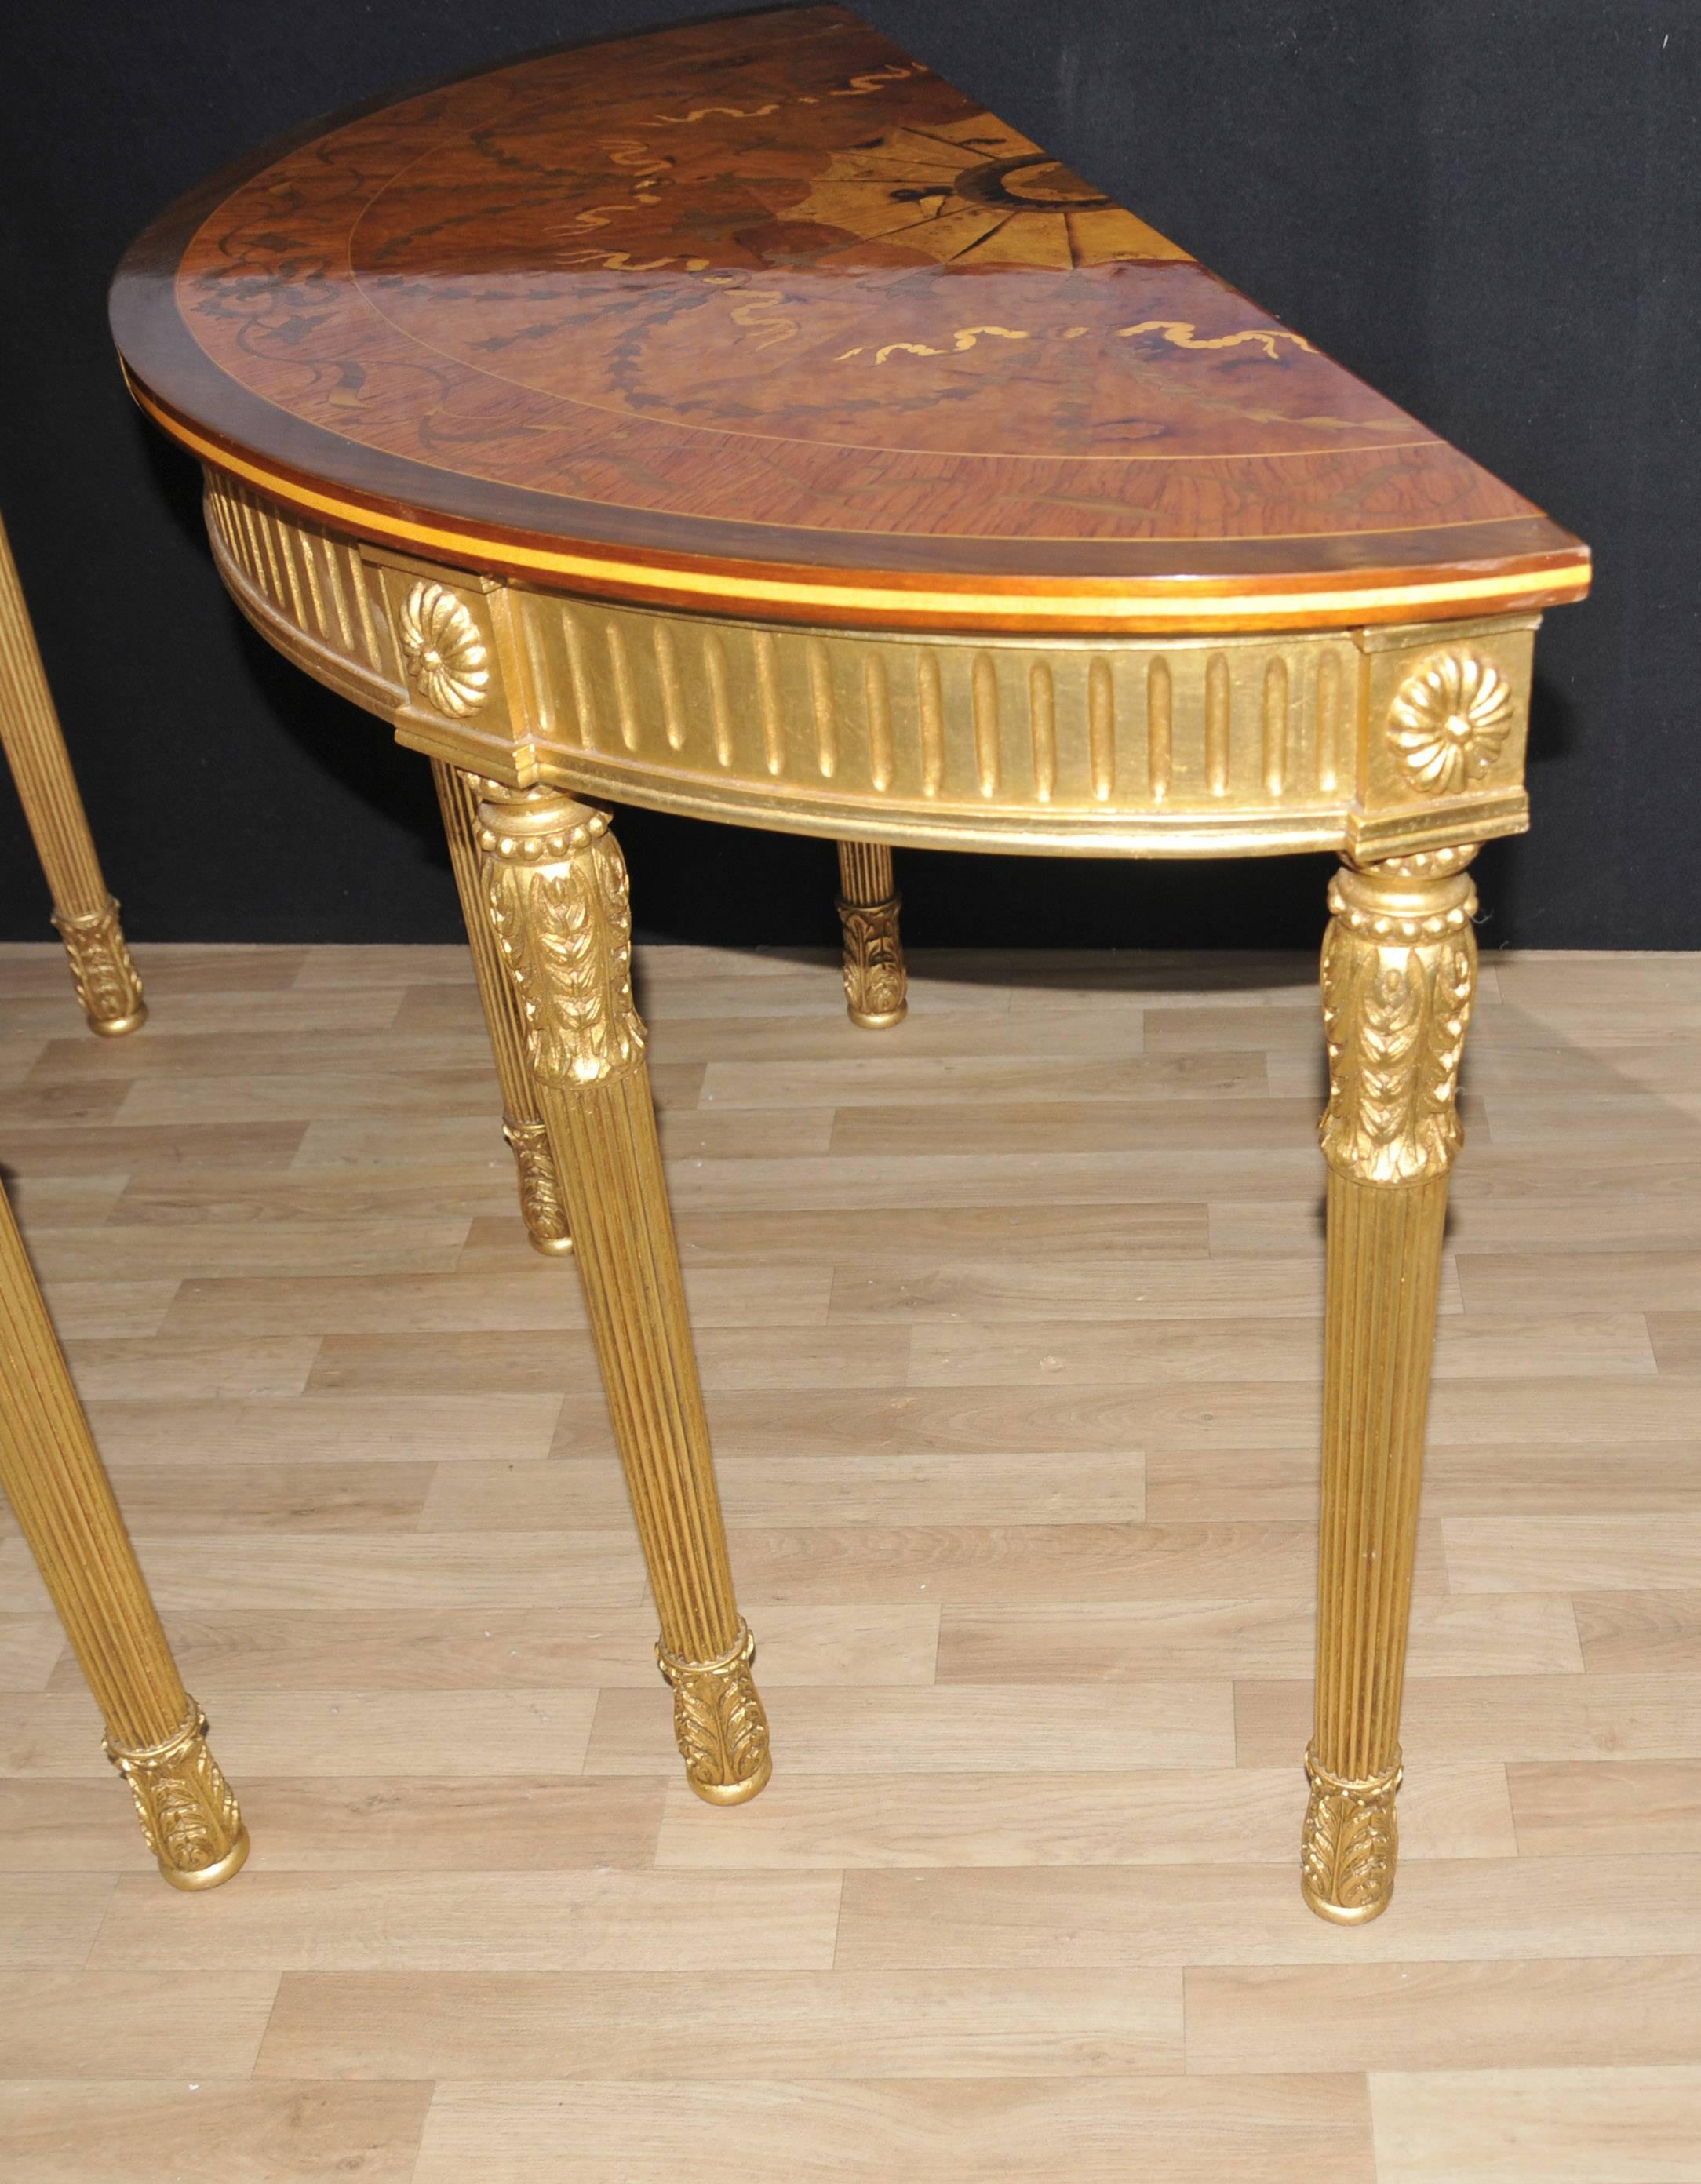 Pair of Adams Regency Style Console Tables Demilune Marquetry Inlay Tops In Good Condition For Sale In Potters Bar, Herts